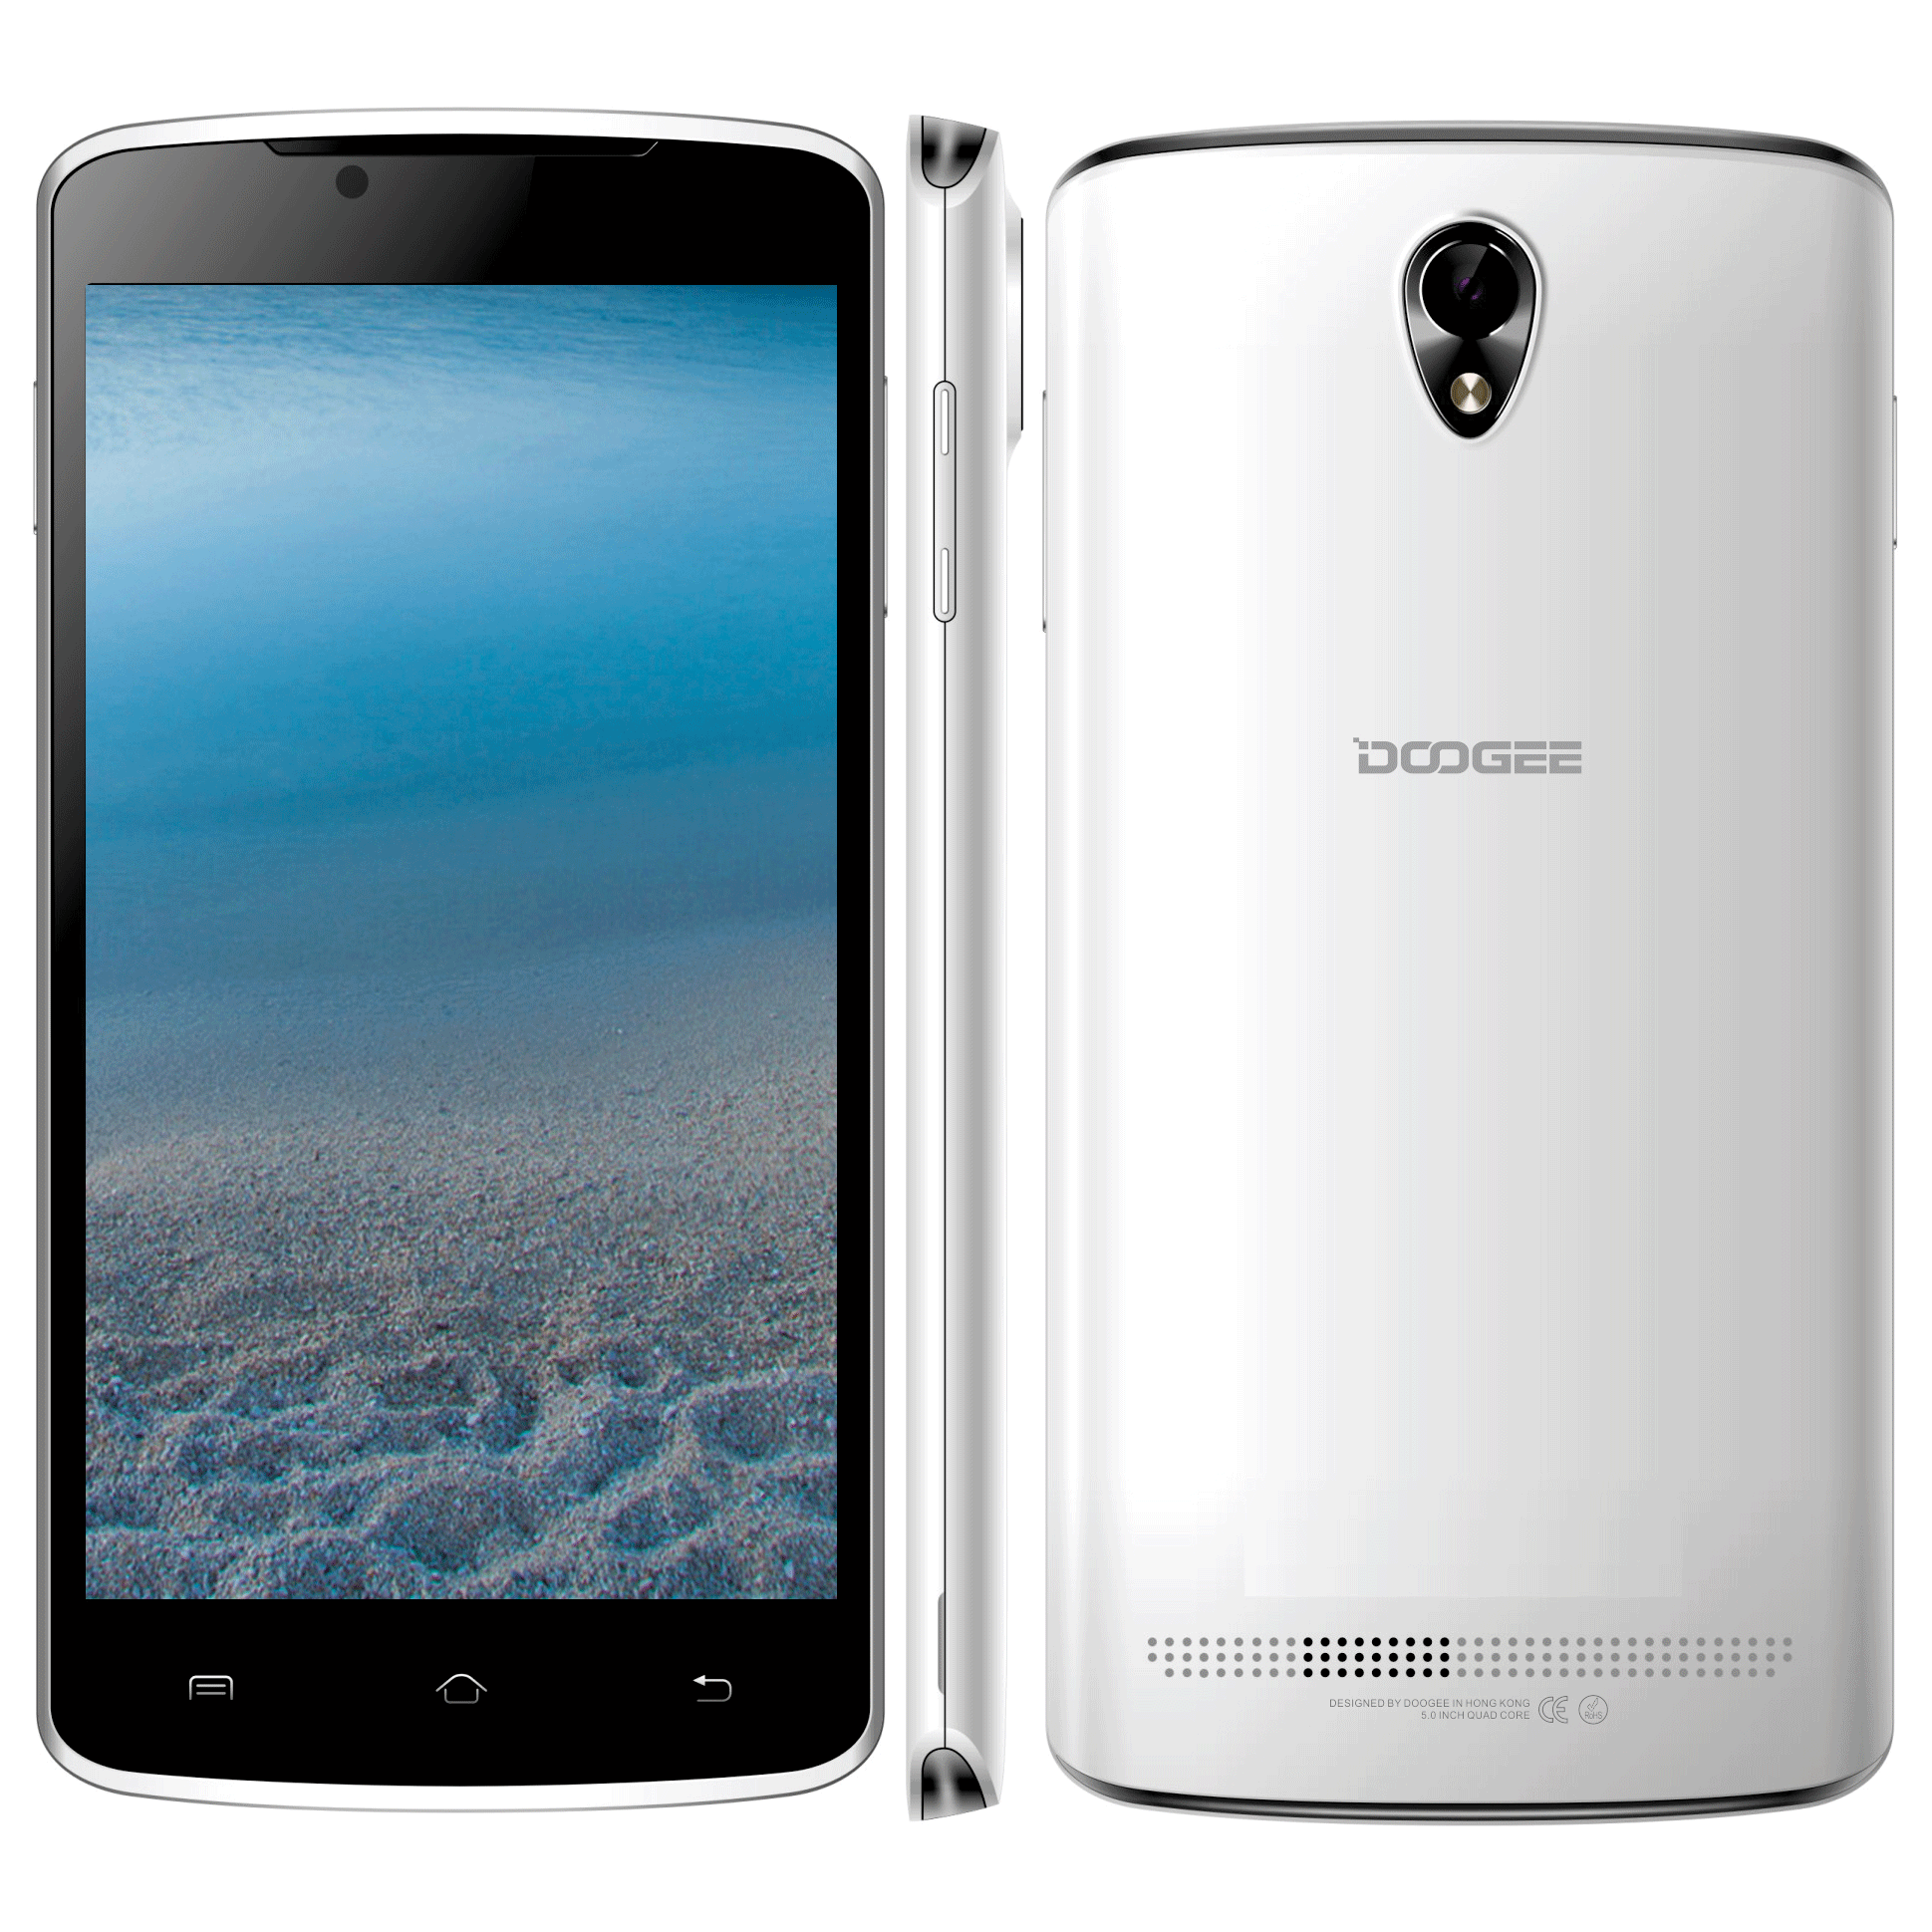 DOOGEE MINT DG330 Smartphone Android 4.2 MTK6582 1GB 4GB 5.0 Inch 3G GPS White